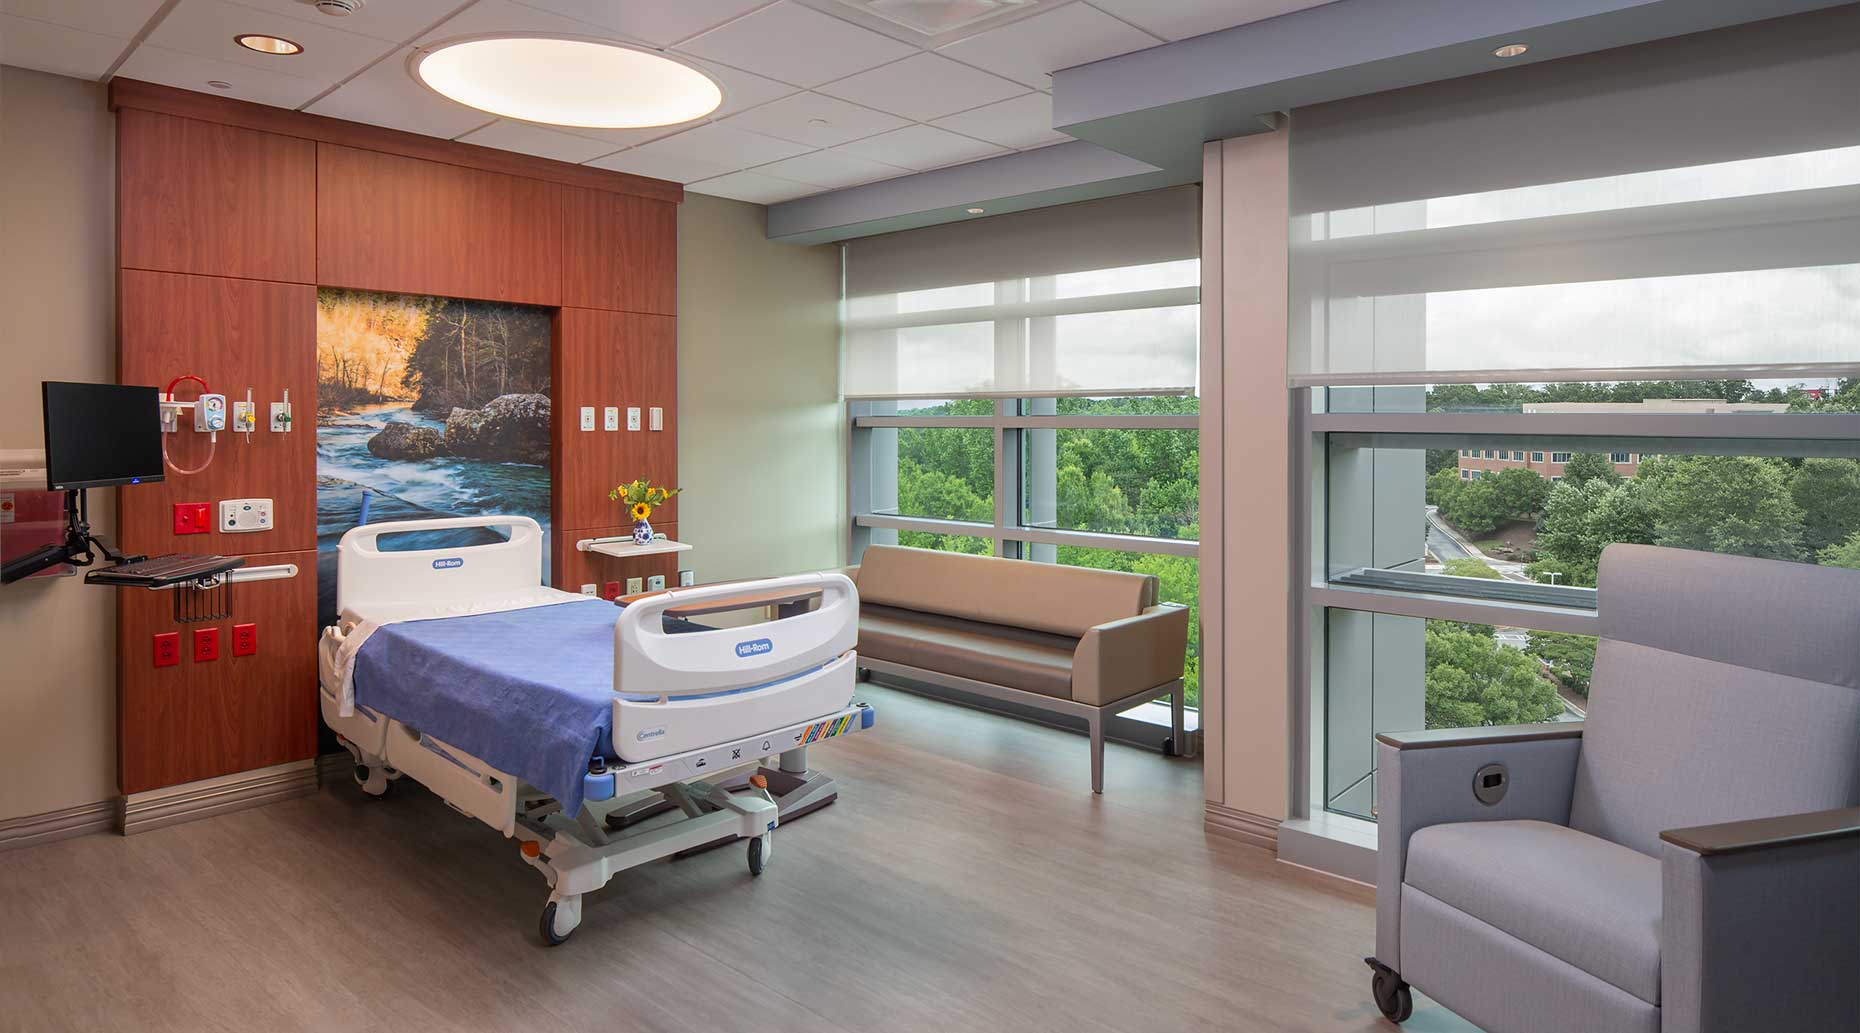 An airy and light patient room at Emory Johns Creek Hospital